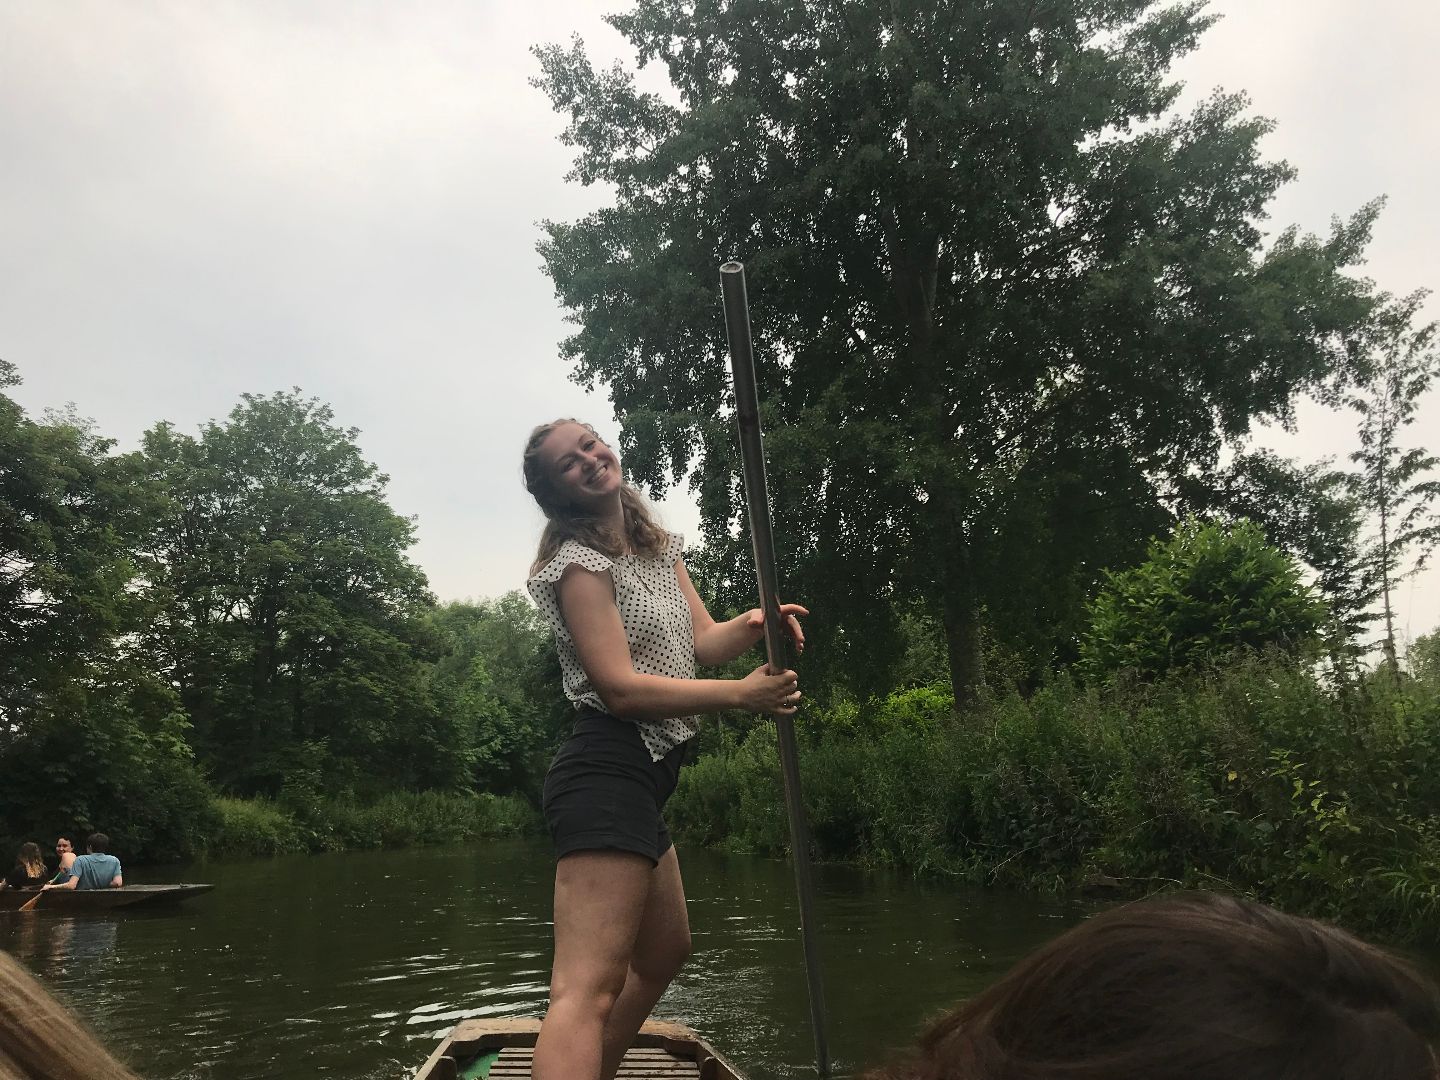 Punting on the river in Oxford England